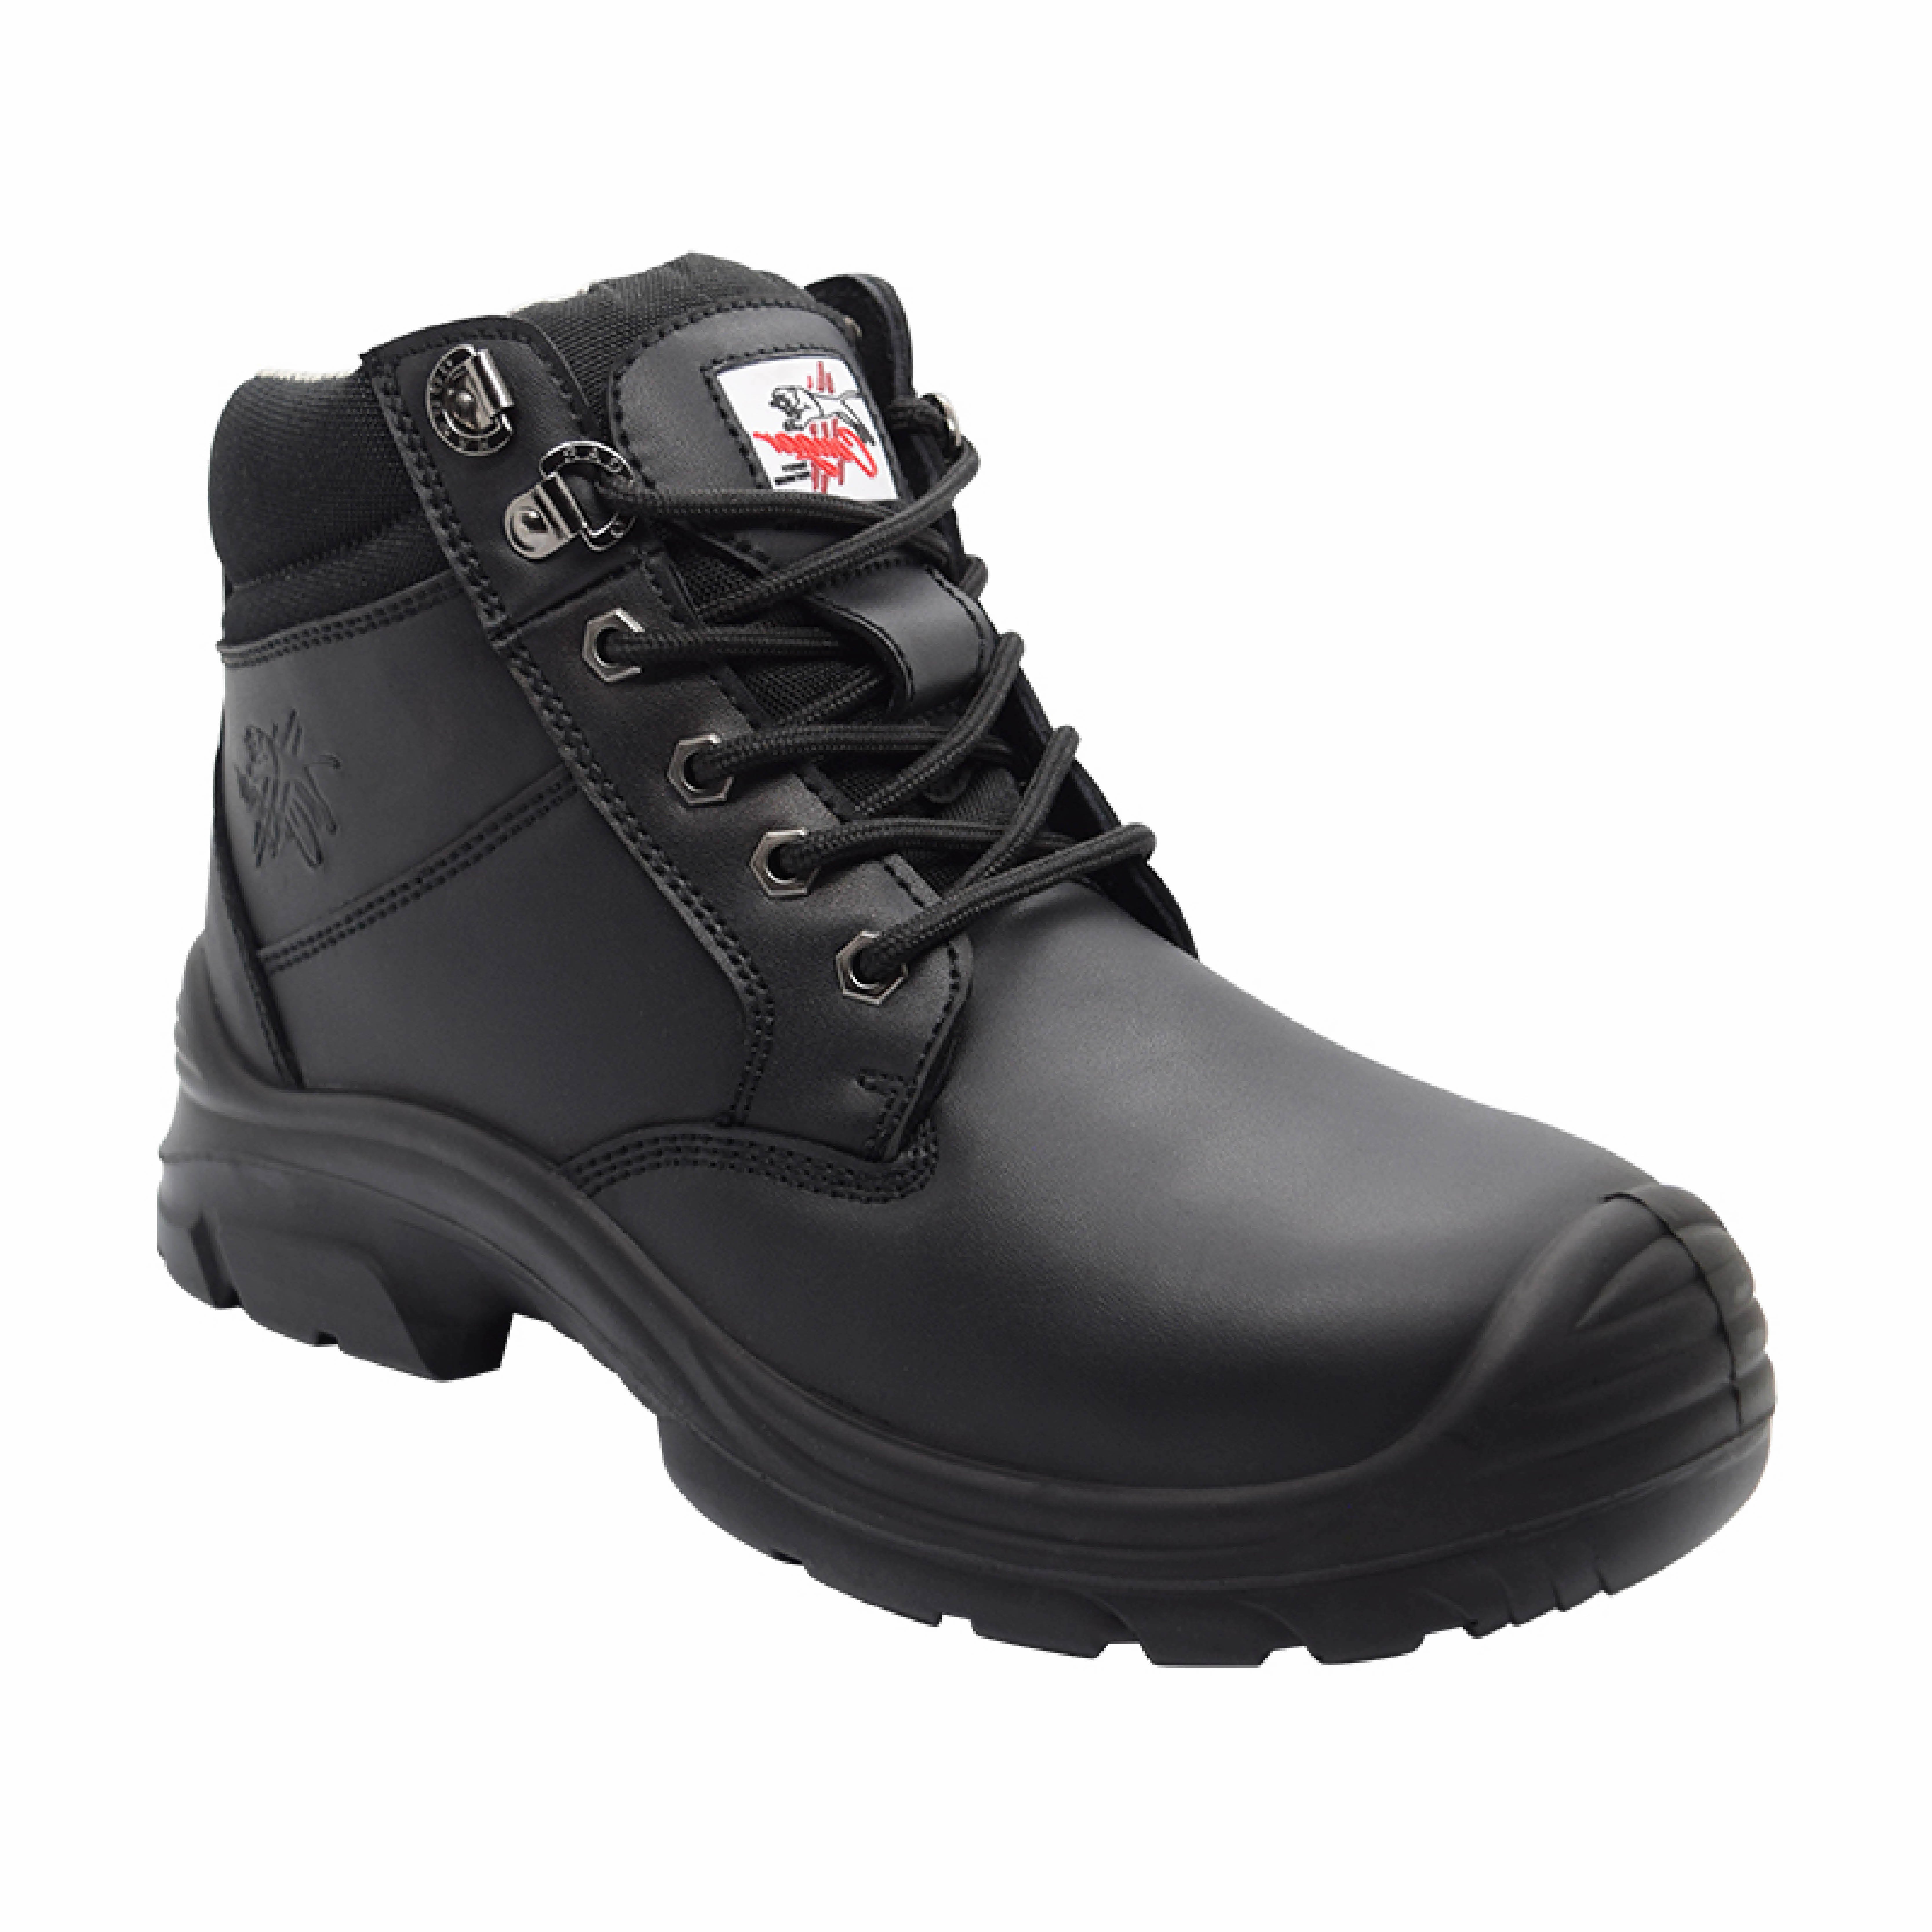 Lace Up Safety Boots with Safety Toe Black Size 8 (1 pair)